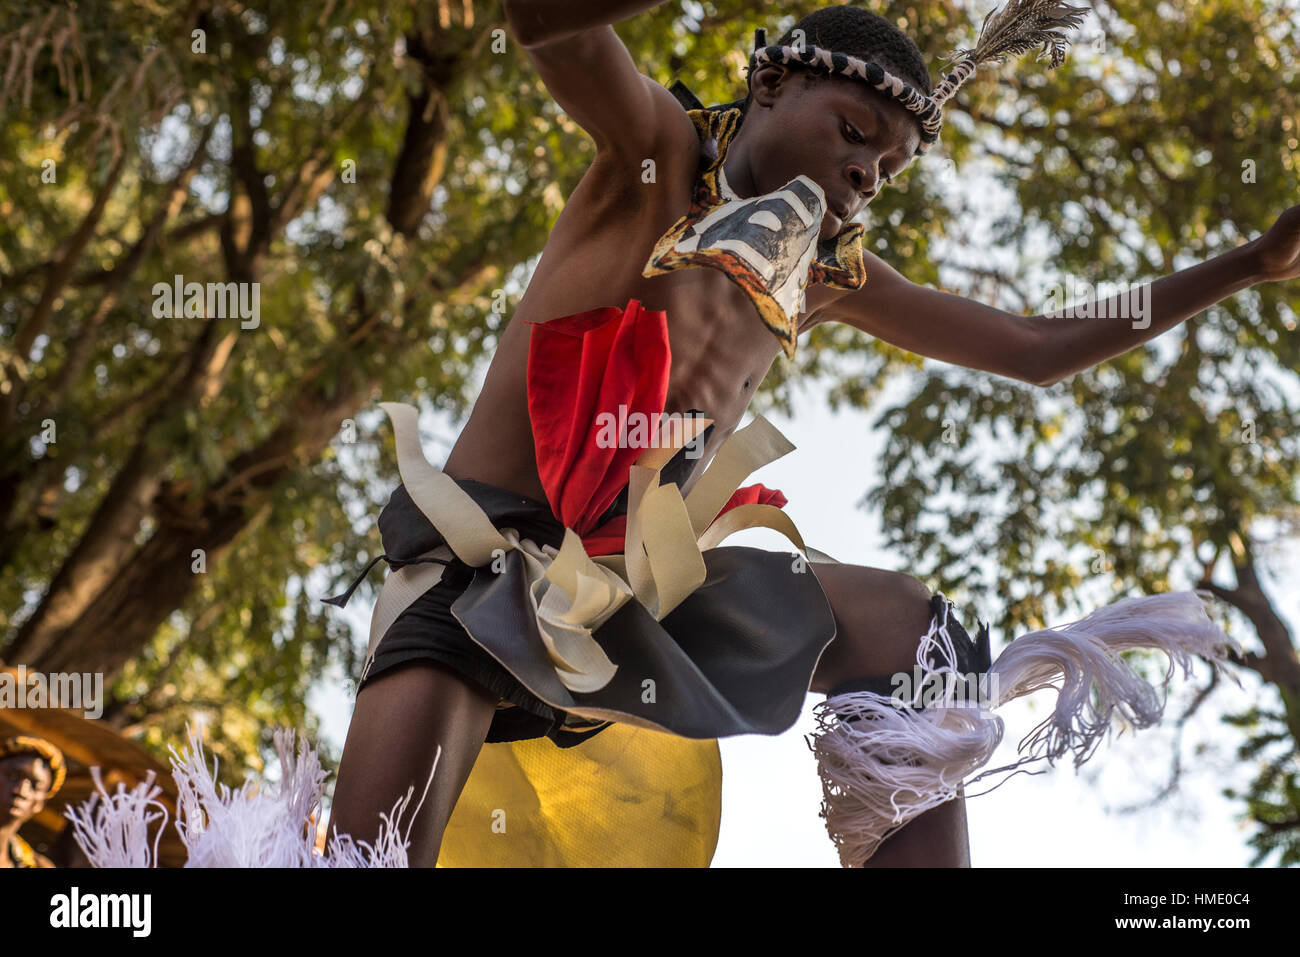 Performing of traditional dance at Zambia International Trade Fair in Ndola, Zambia Stock Photo